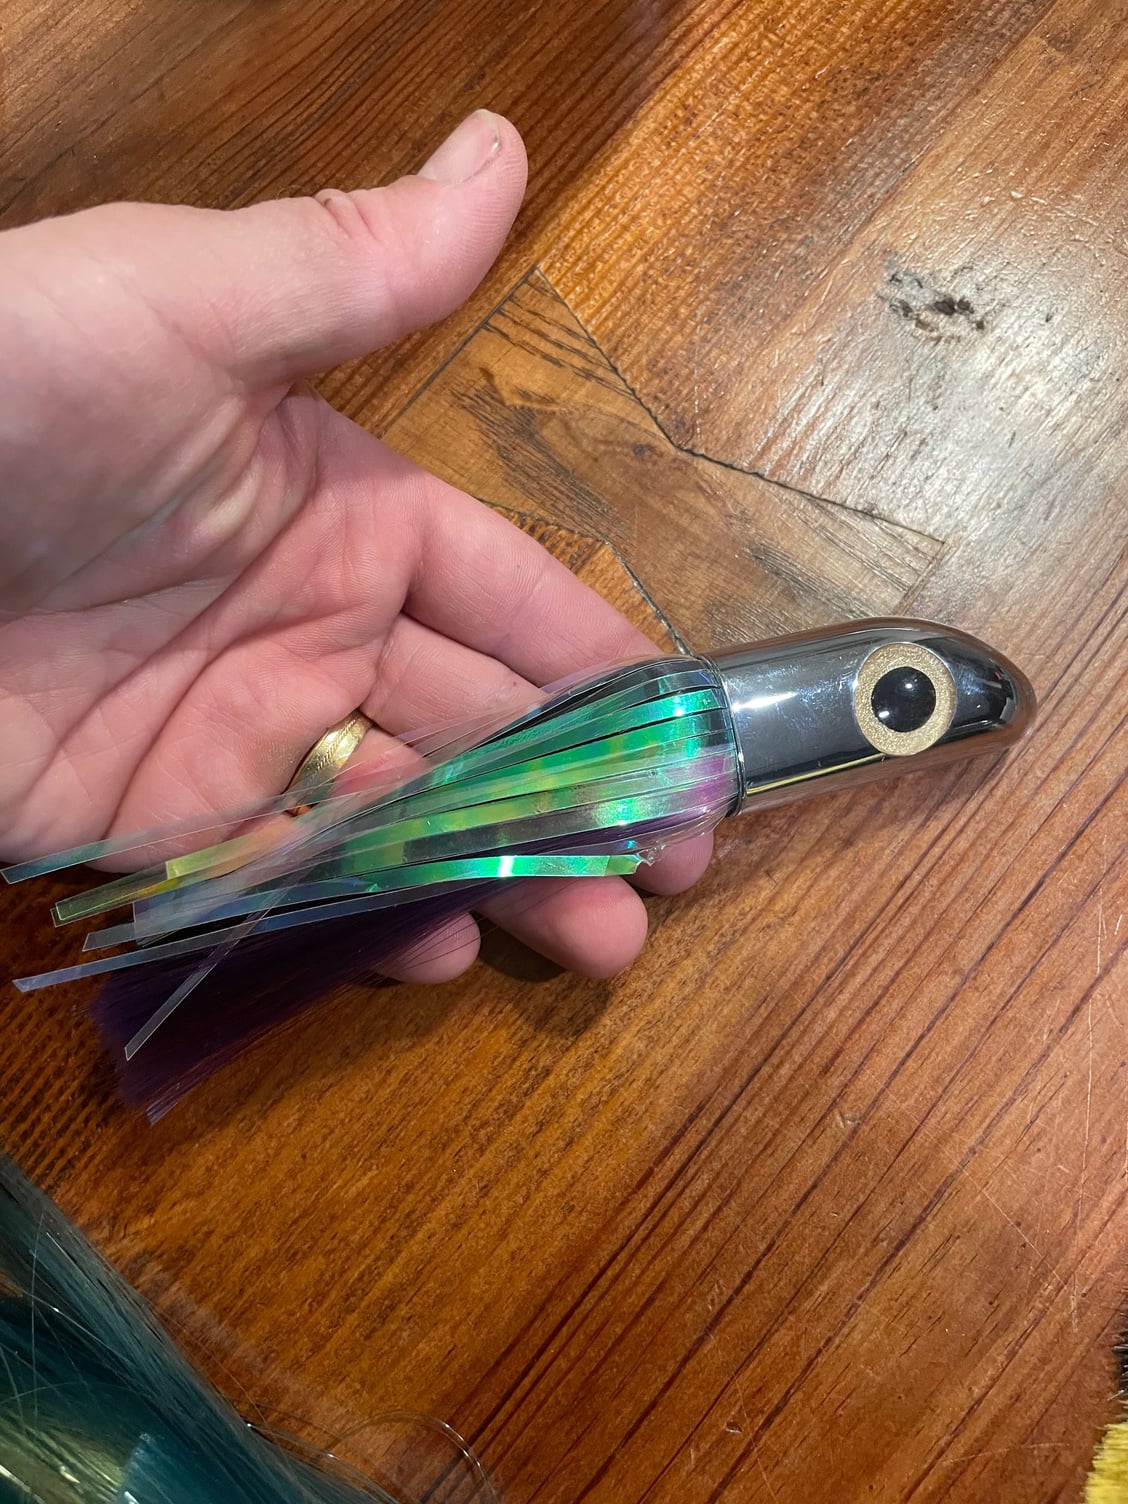 5 rigged wahoo lures - The Hull Truth - Boating and Fishing Forum